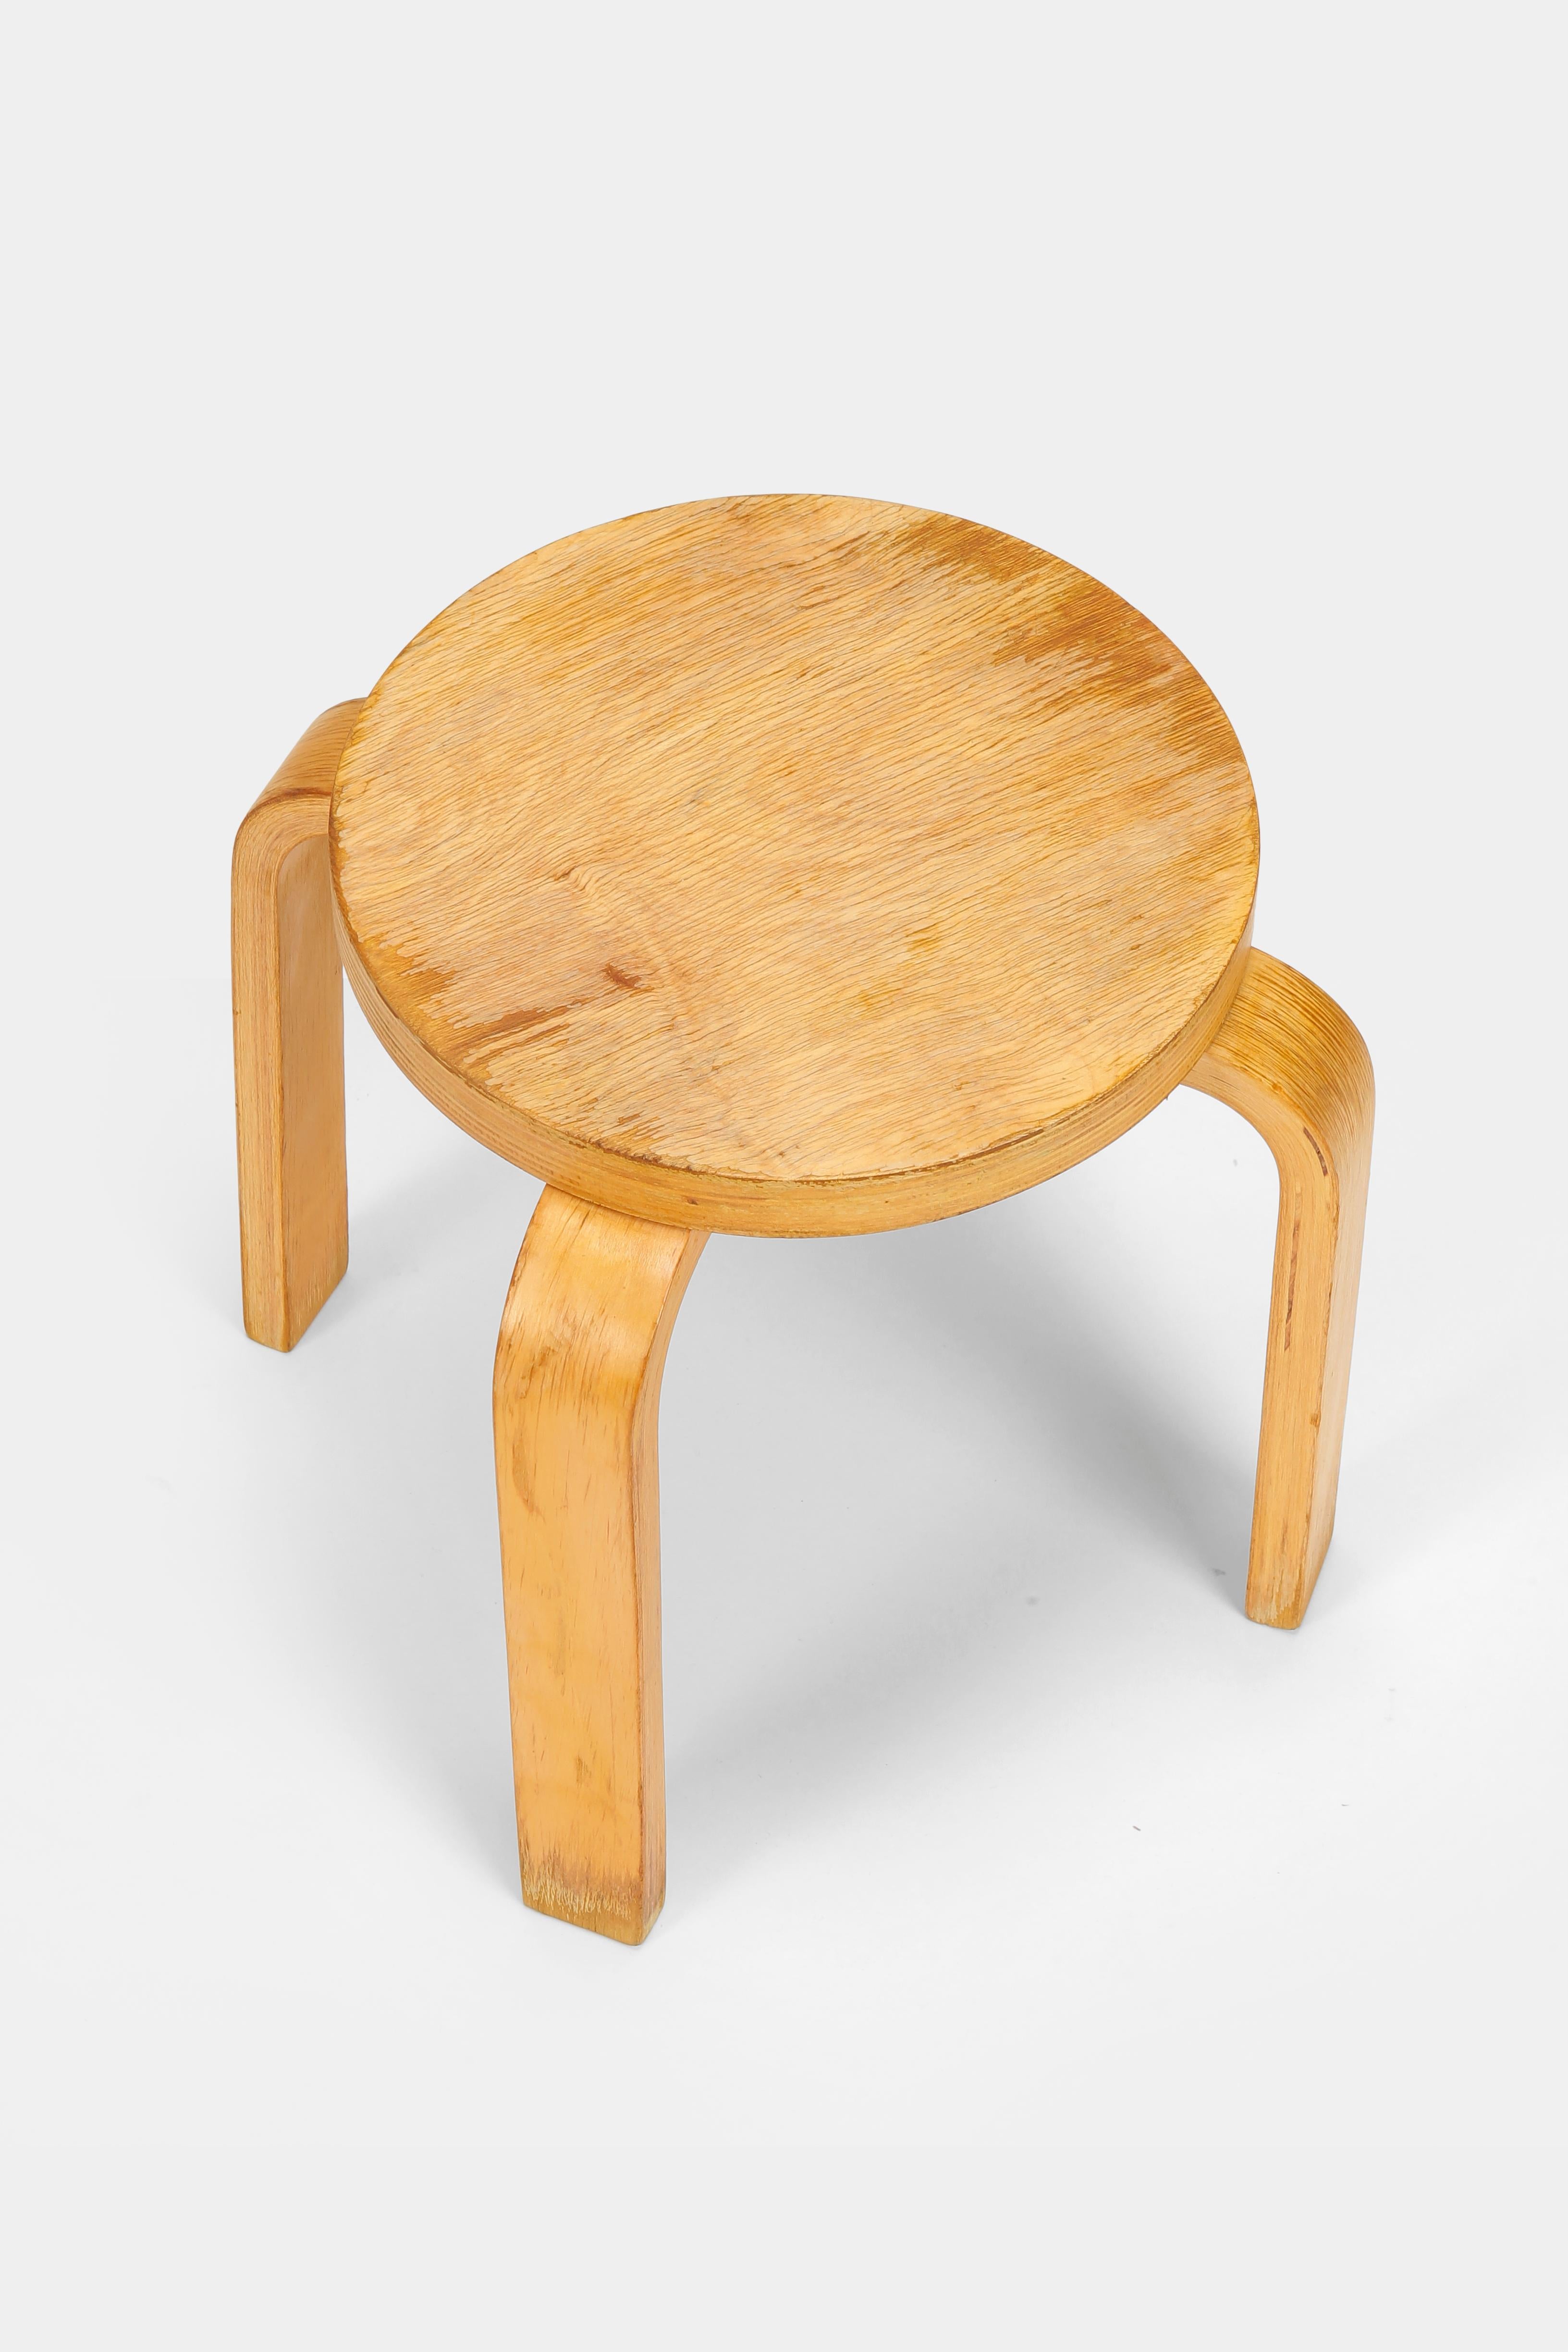 Alvar Aalto children's stool made of birch plywood by Artek in Finland in the eighties. Iconic Finnish design and material. Lightly restored and in used condition.